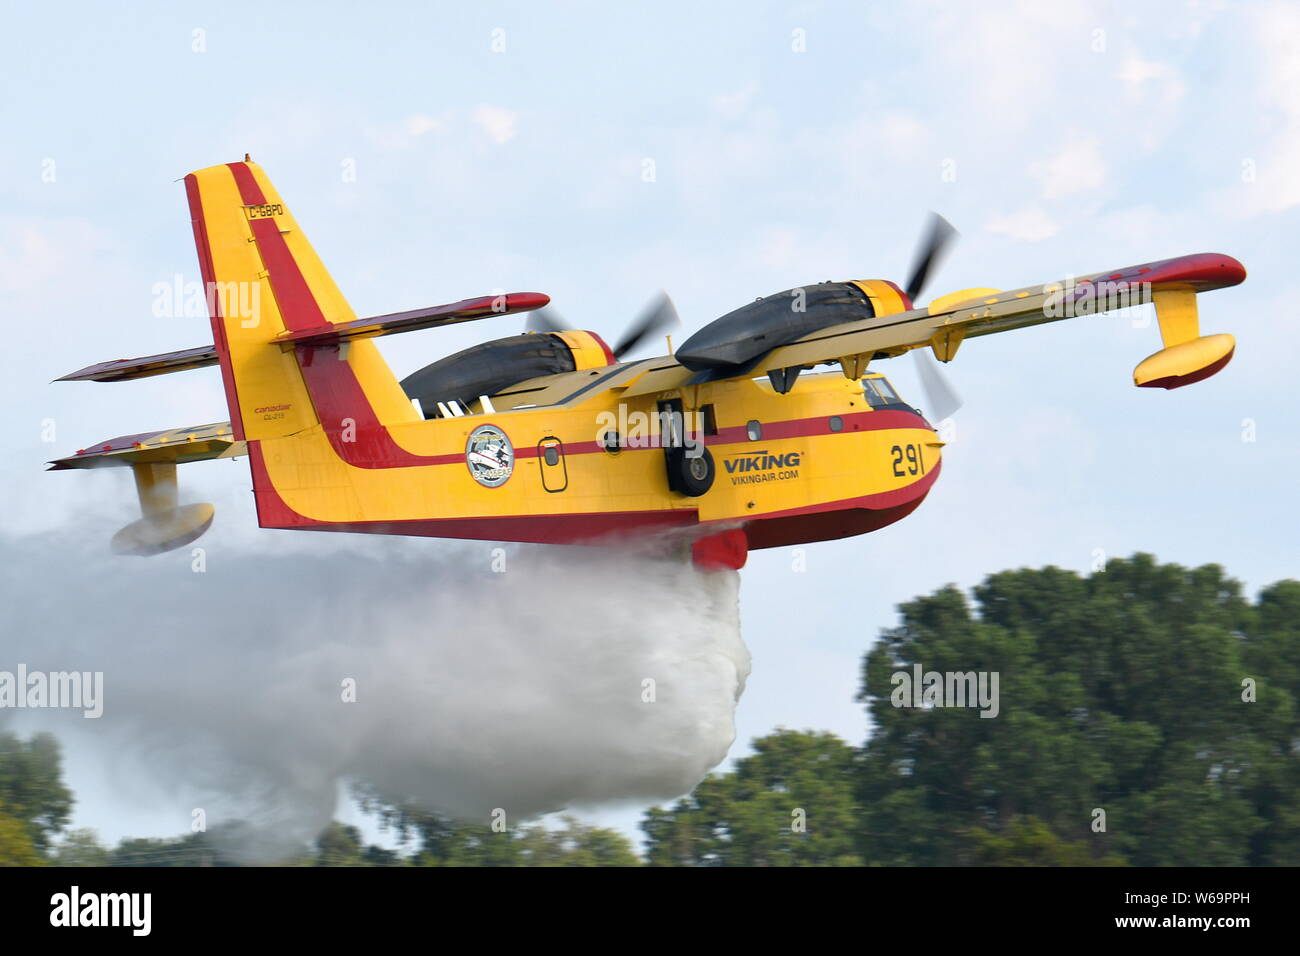 CANADAIR CL-215 WATER BOMBER USED FOR FIGHTING FIRES Stock Photo - Alamy